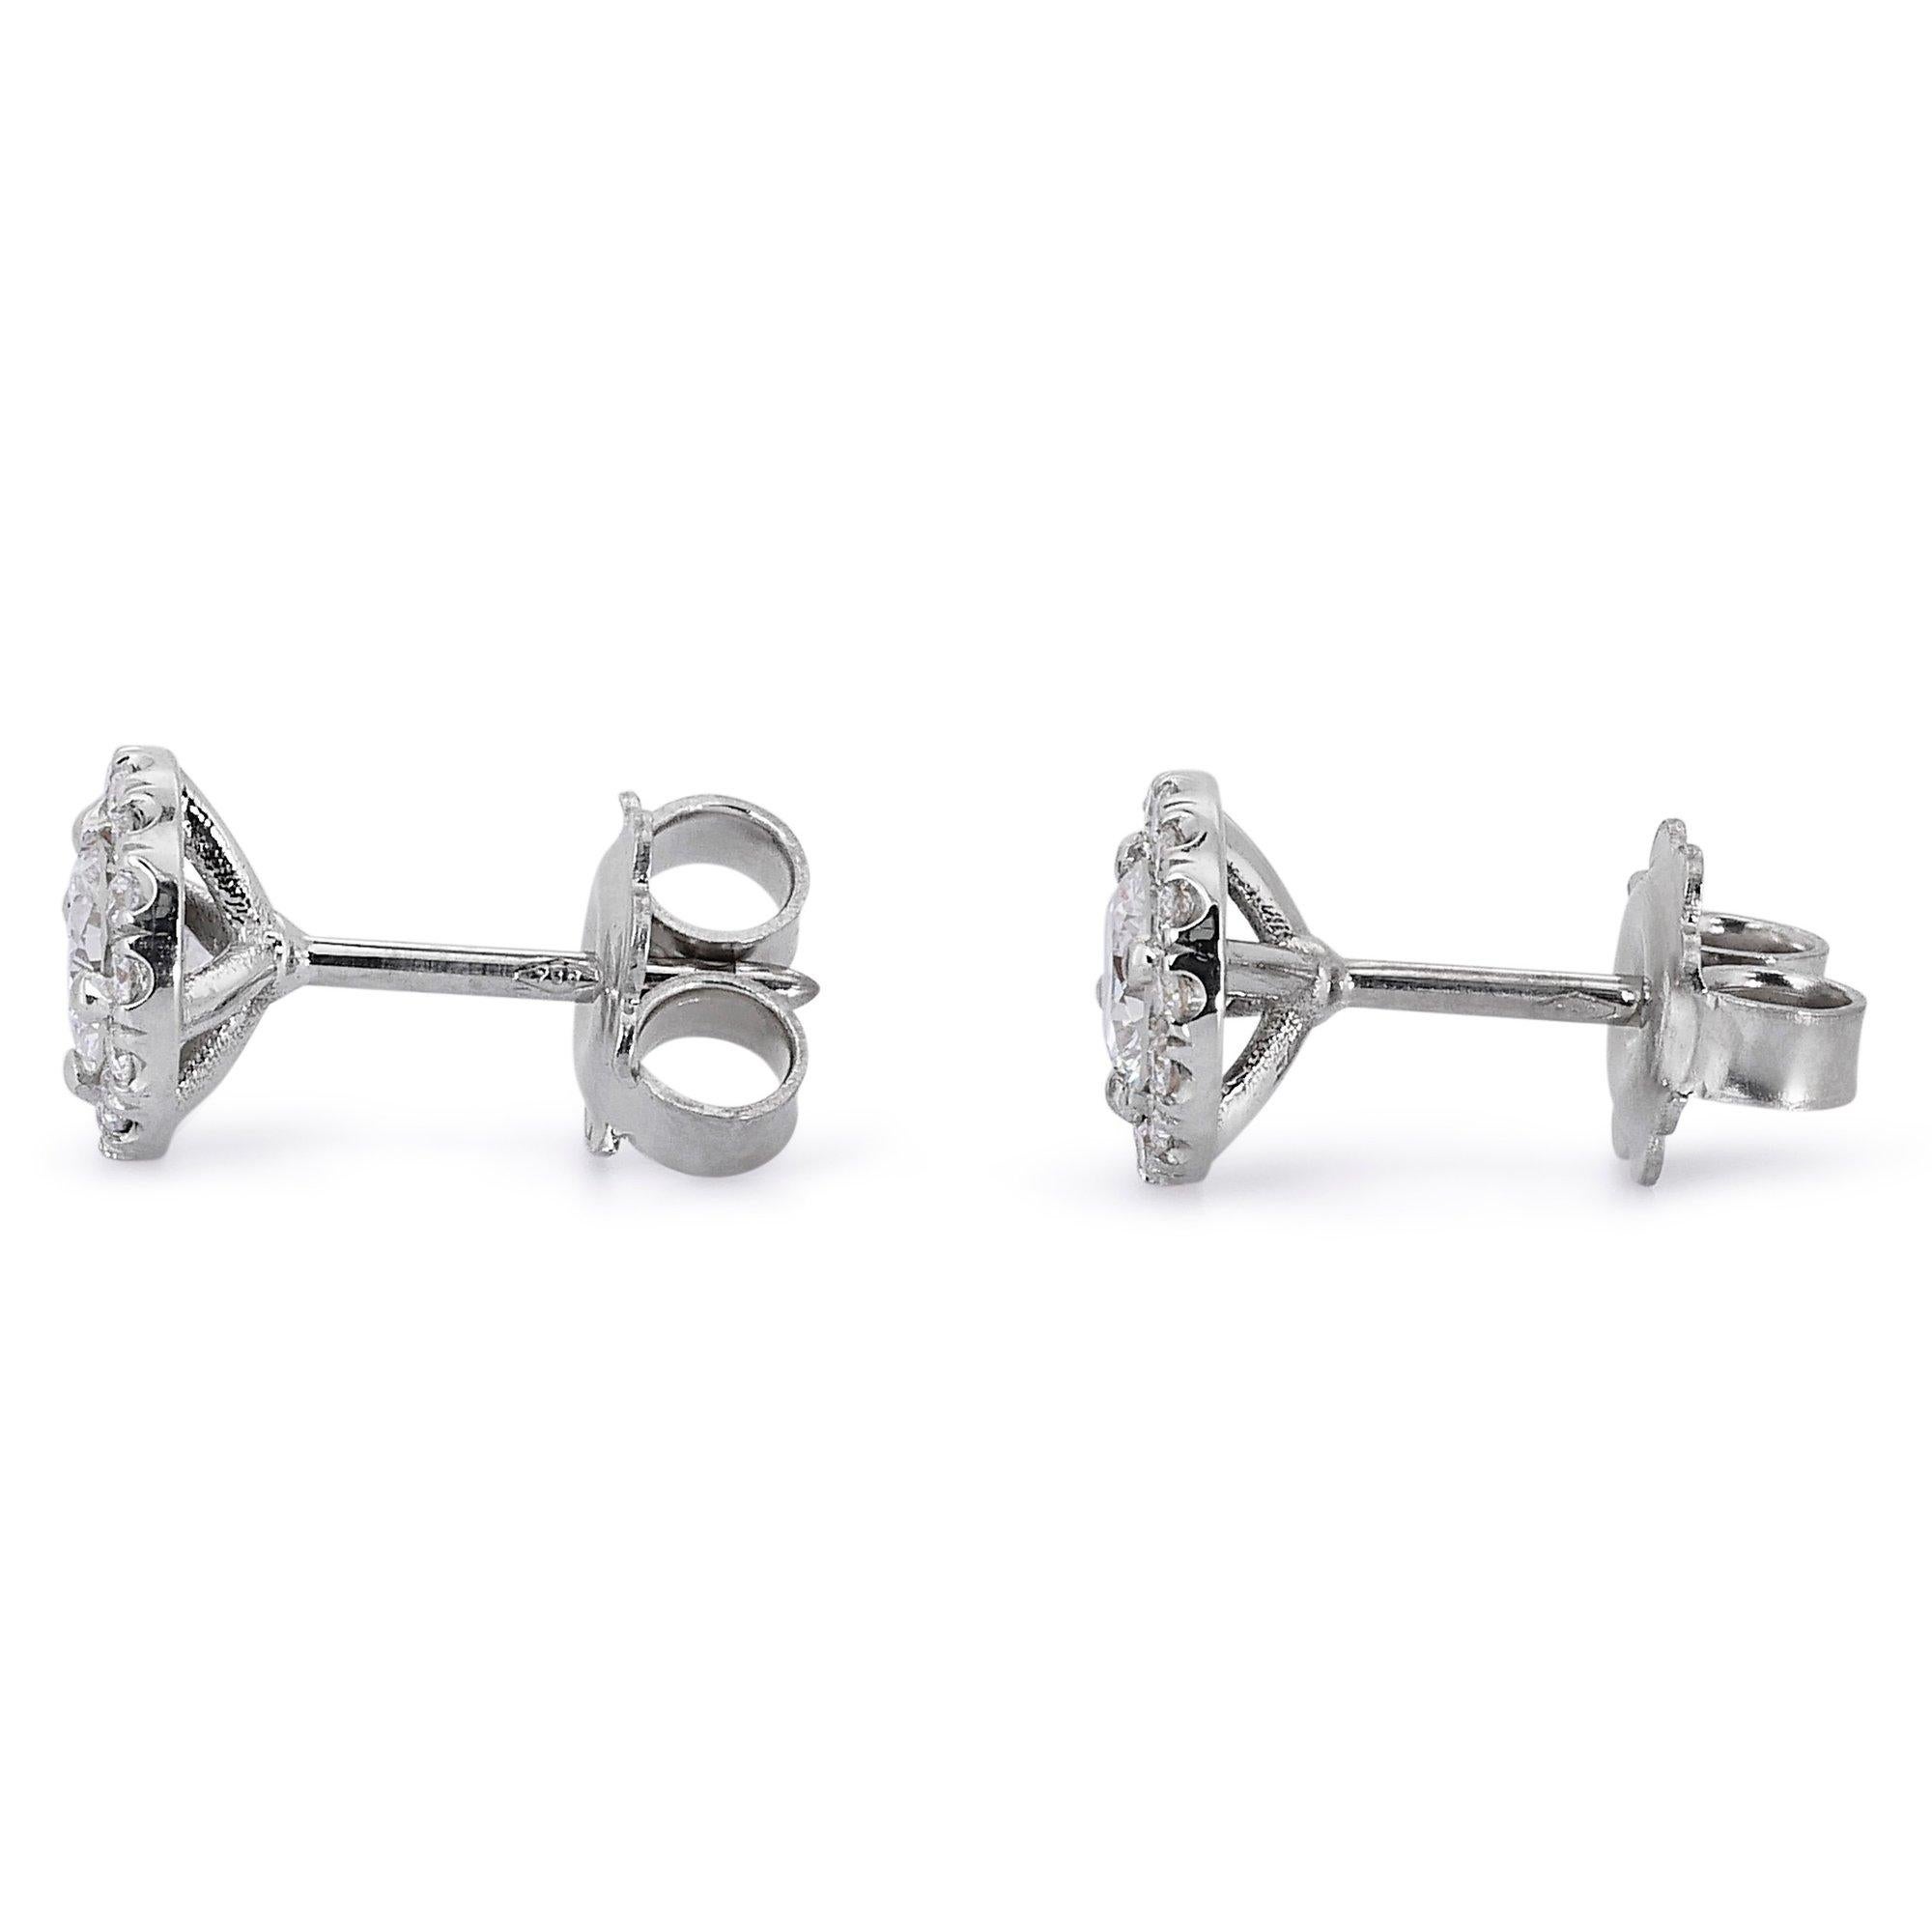 Luxurious 1.24ct Round Diamond Stud Earrings in 18K White Gold - GIA Certified For Sale 3